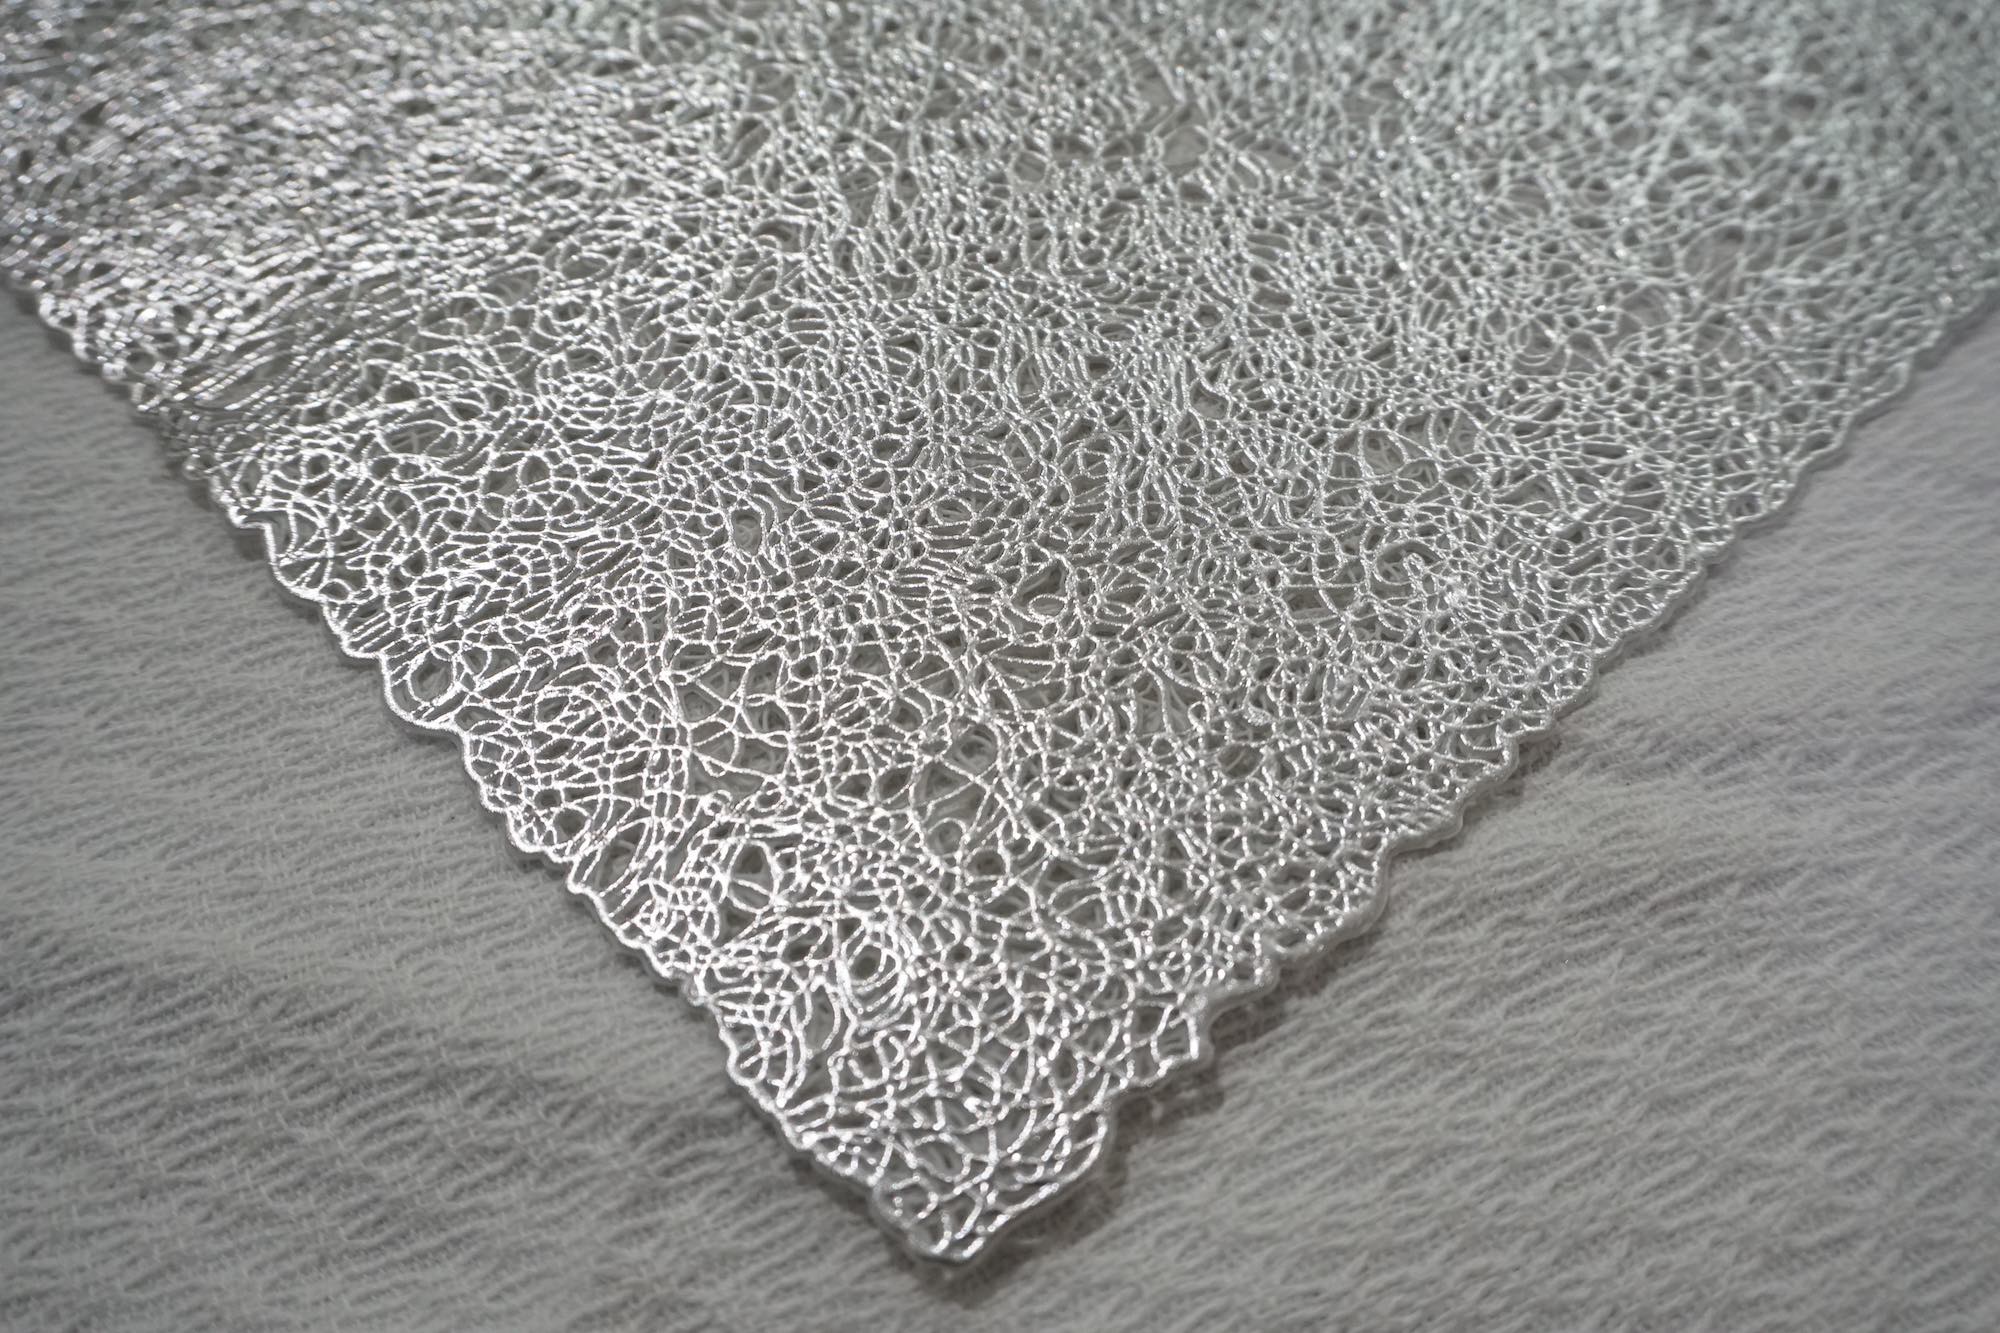 Dainty Home Lacey Woven Metallic Lace Crossweave With Metallic Lace Pattern Reversible 12" x 18" Rectangular Placemats